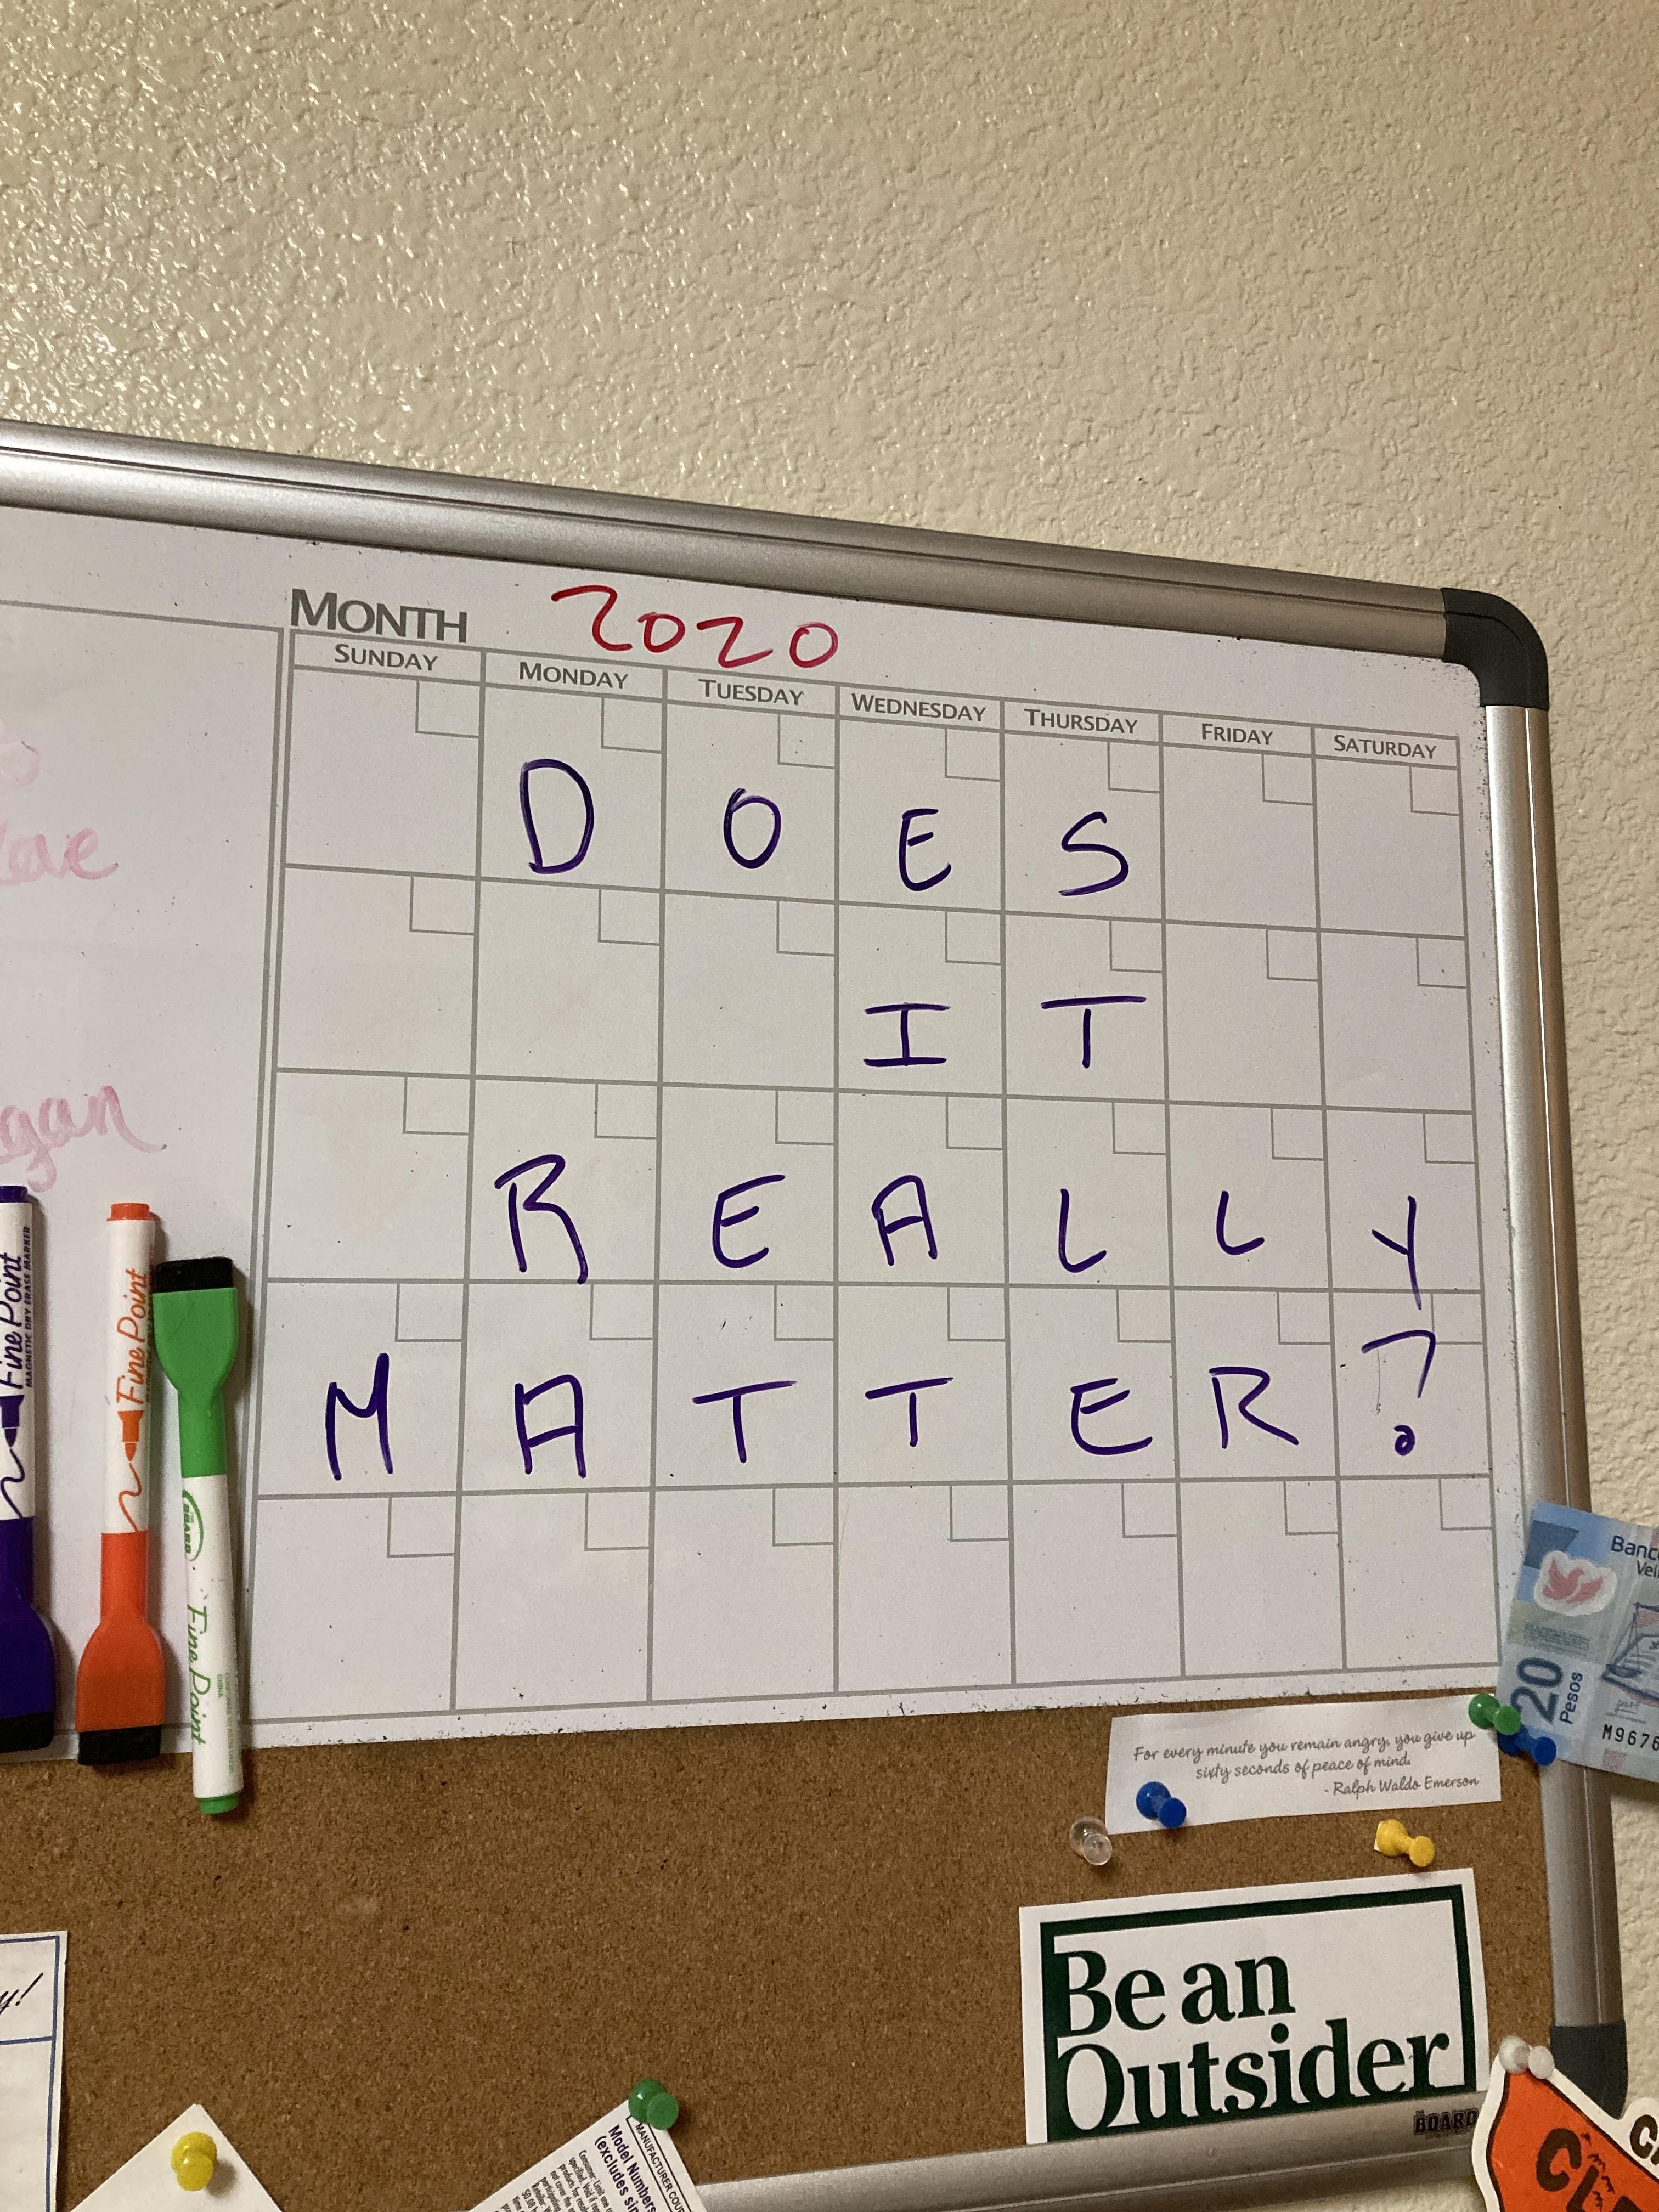 I told my wife to update our dry erase calendar since it was last done in July. This is her update.